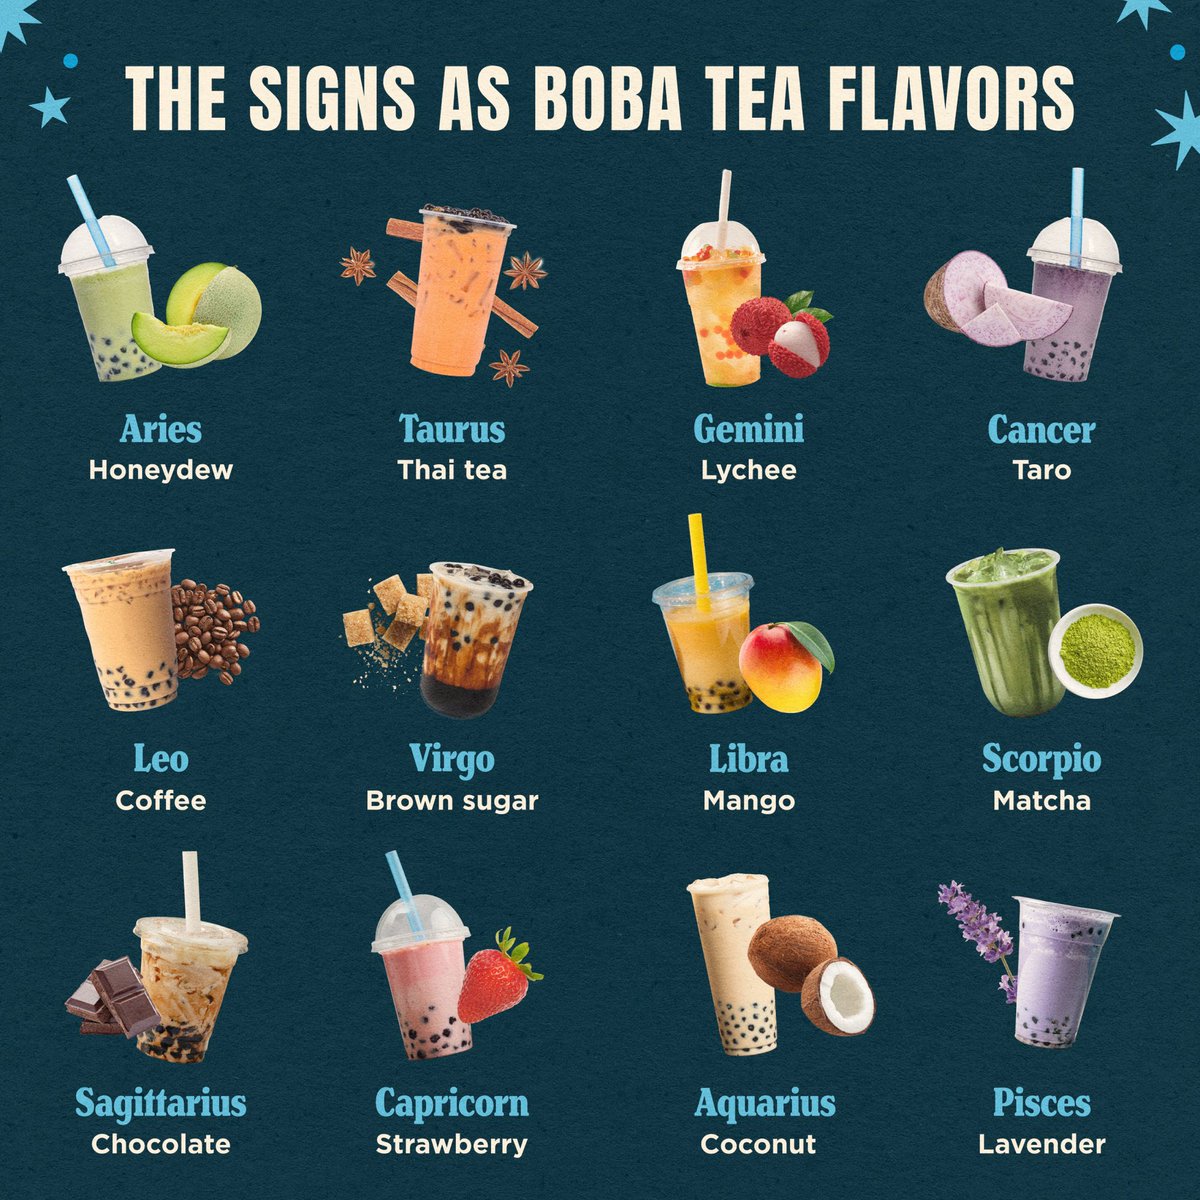 Our excitement is bubbling over…We’re ecstatic to share there is now a Boba category in the Favor app! Open the app, choose your sign’s flavor, and enjoy bubble tea delivered straight to your door. 🧋 #bobatea